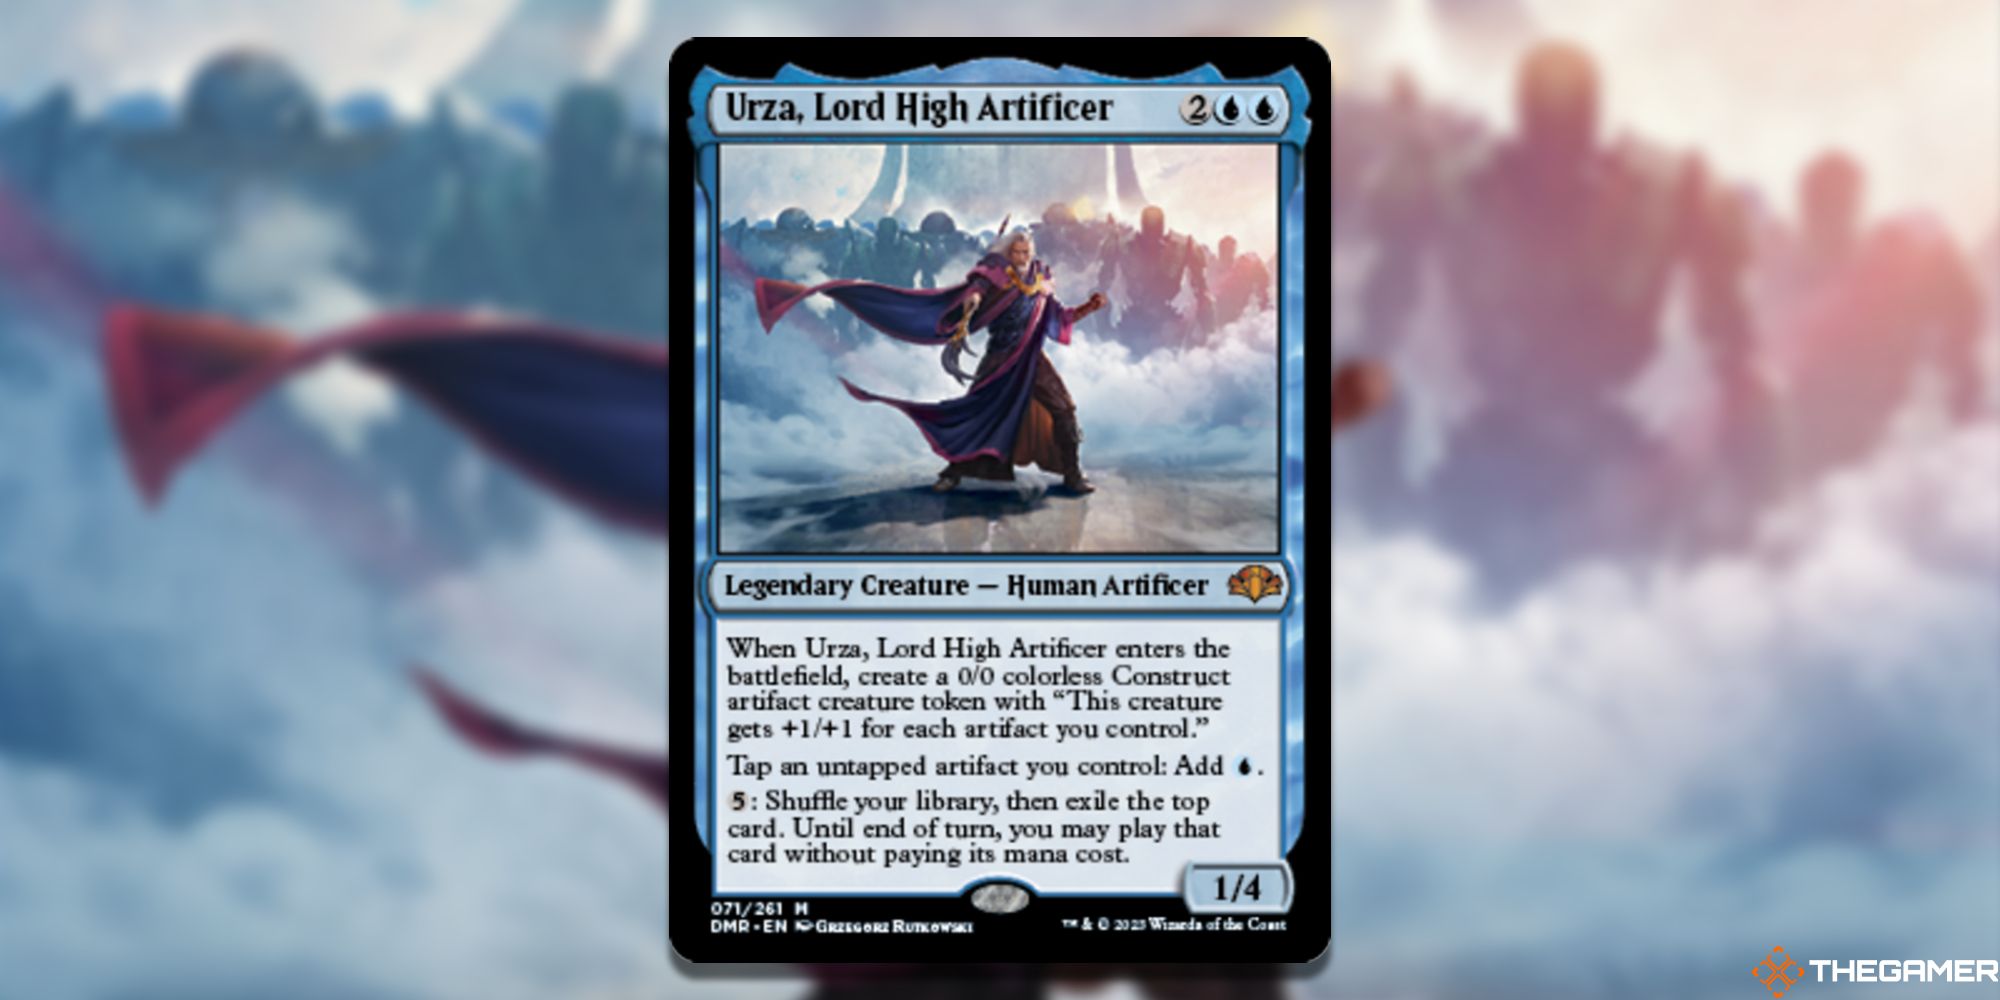 Image of the Urza Lord High Artificer  card in Magic: The Gathering, with art by Grzegorz Rutkowski